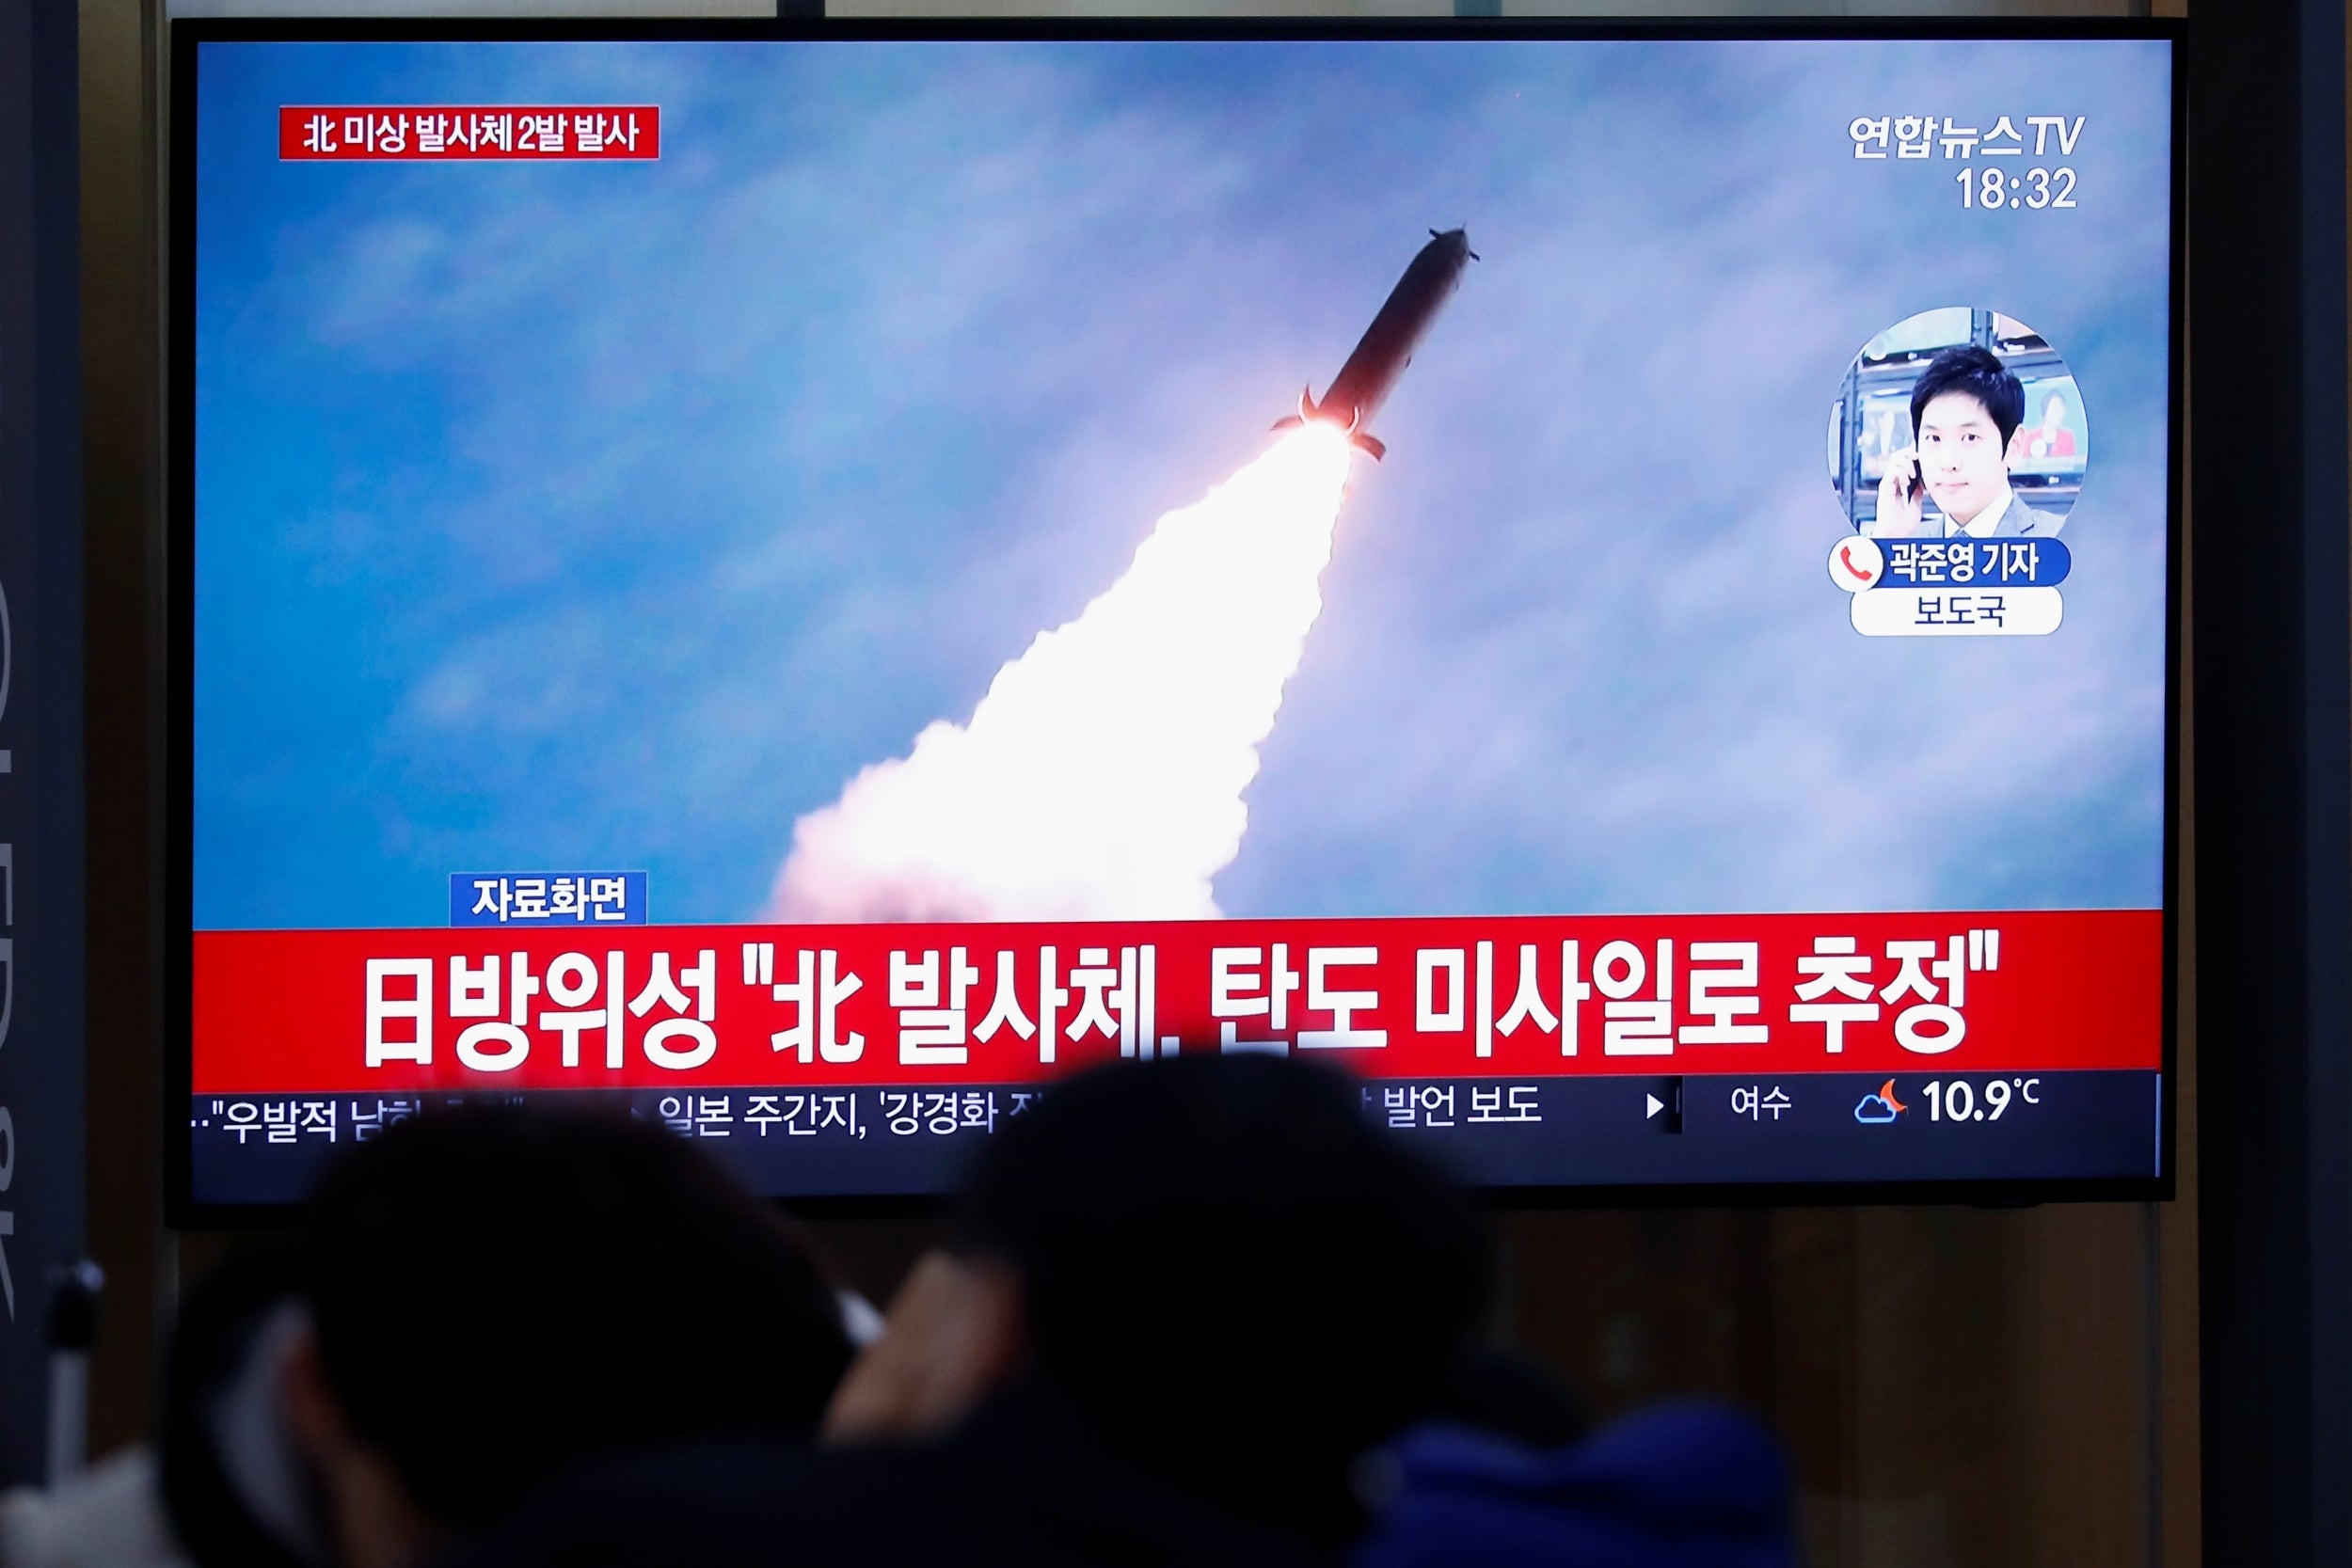 People in Seoul, South Korea, watch television footage of the launch of an unidentified projectile by North Korea